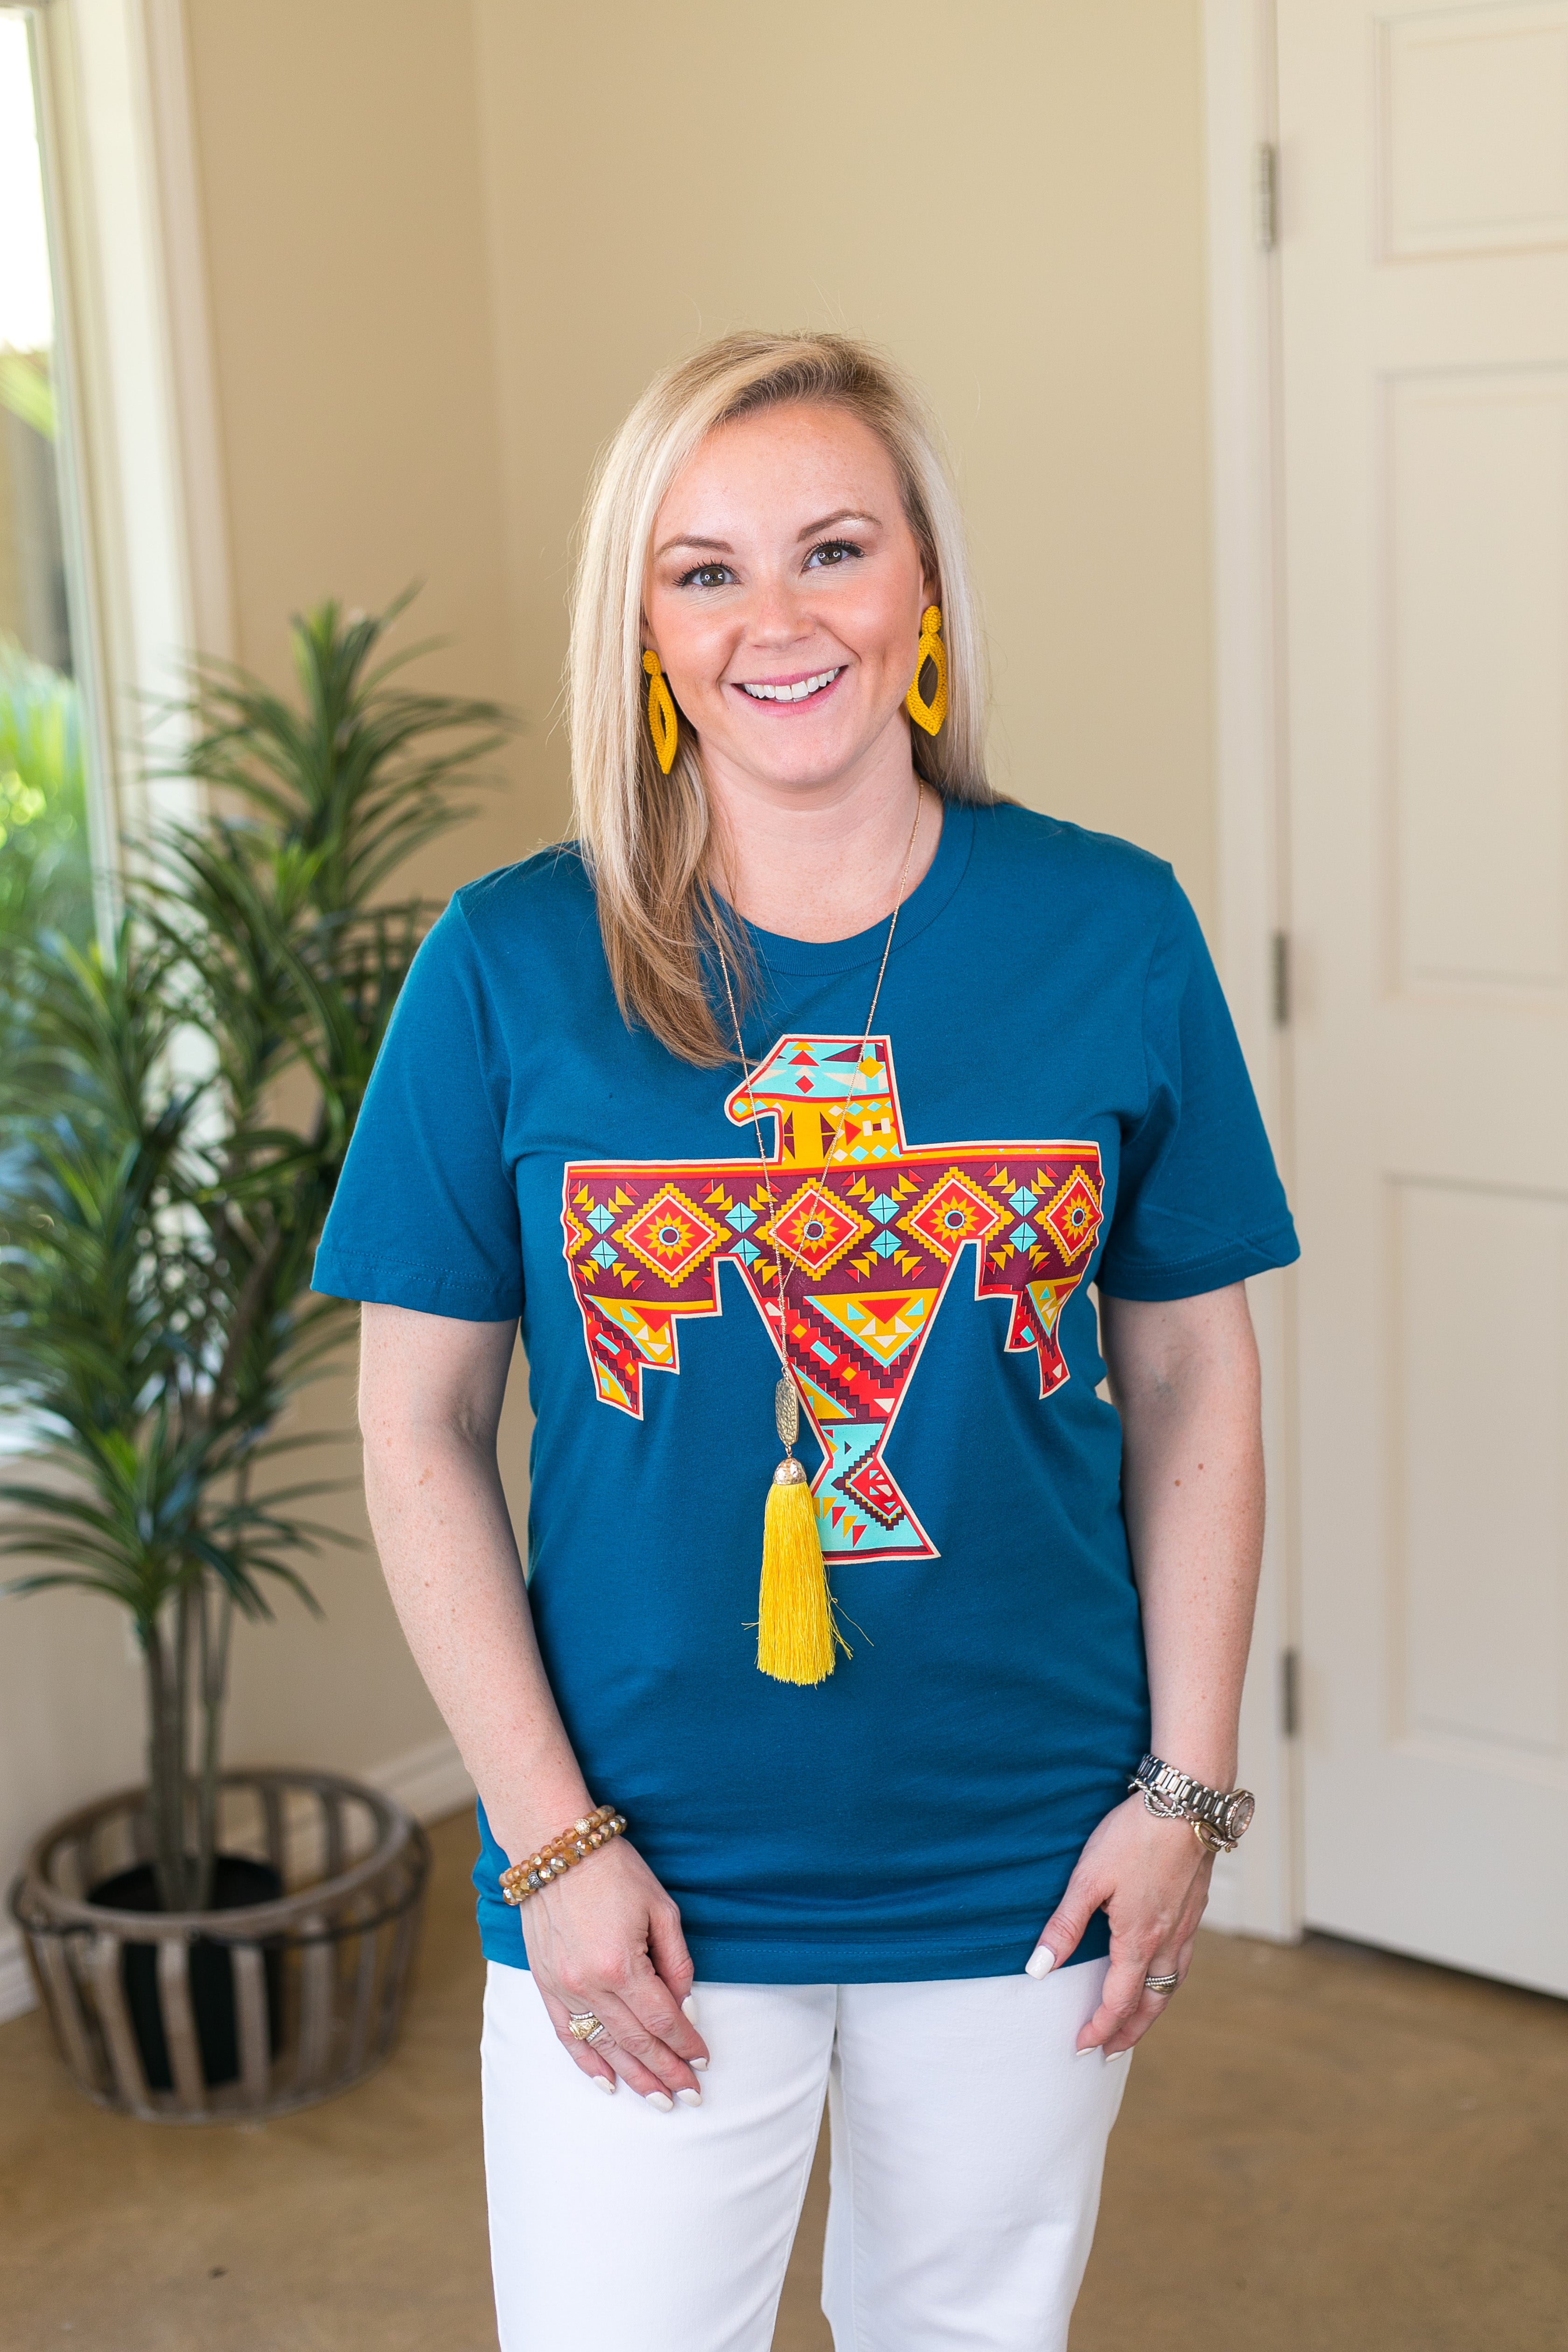 Keep Her Wild Aztec Thunderbird Graphic Short Sleeve Tee Shirt in Teal Blue - Giddy Up Glamour Boutique